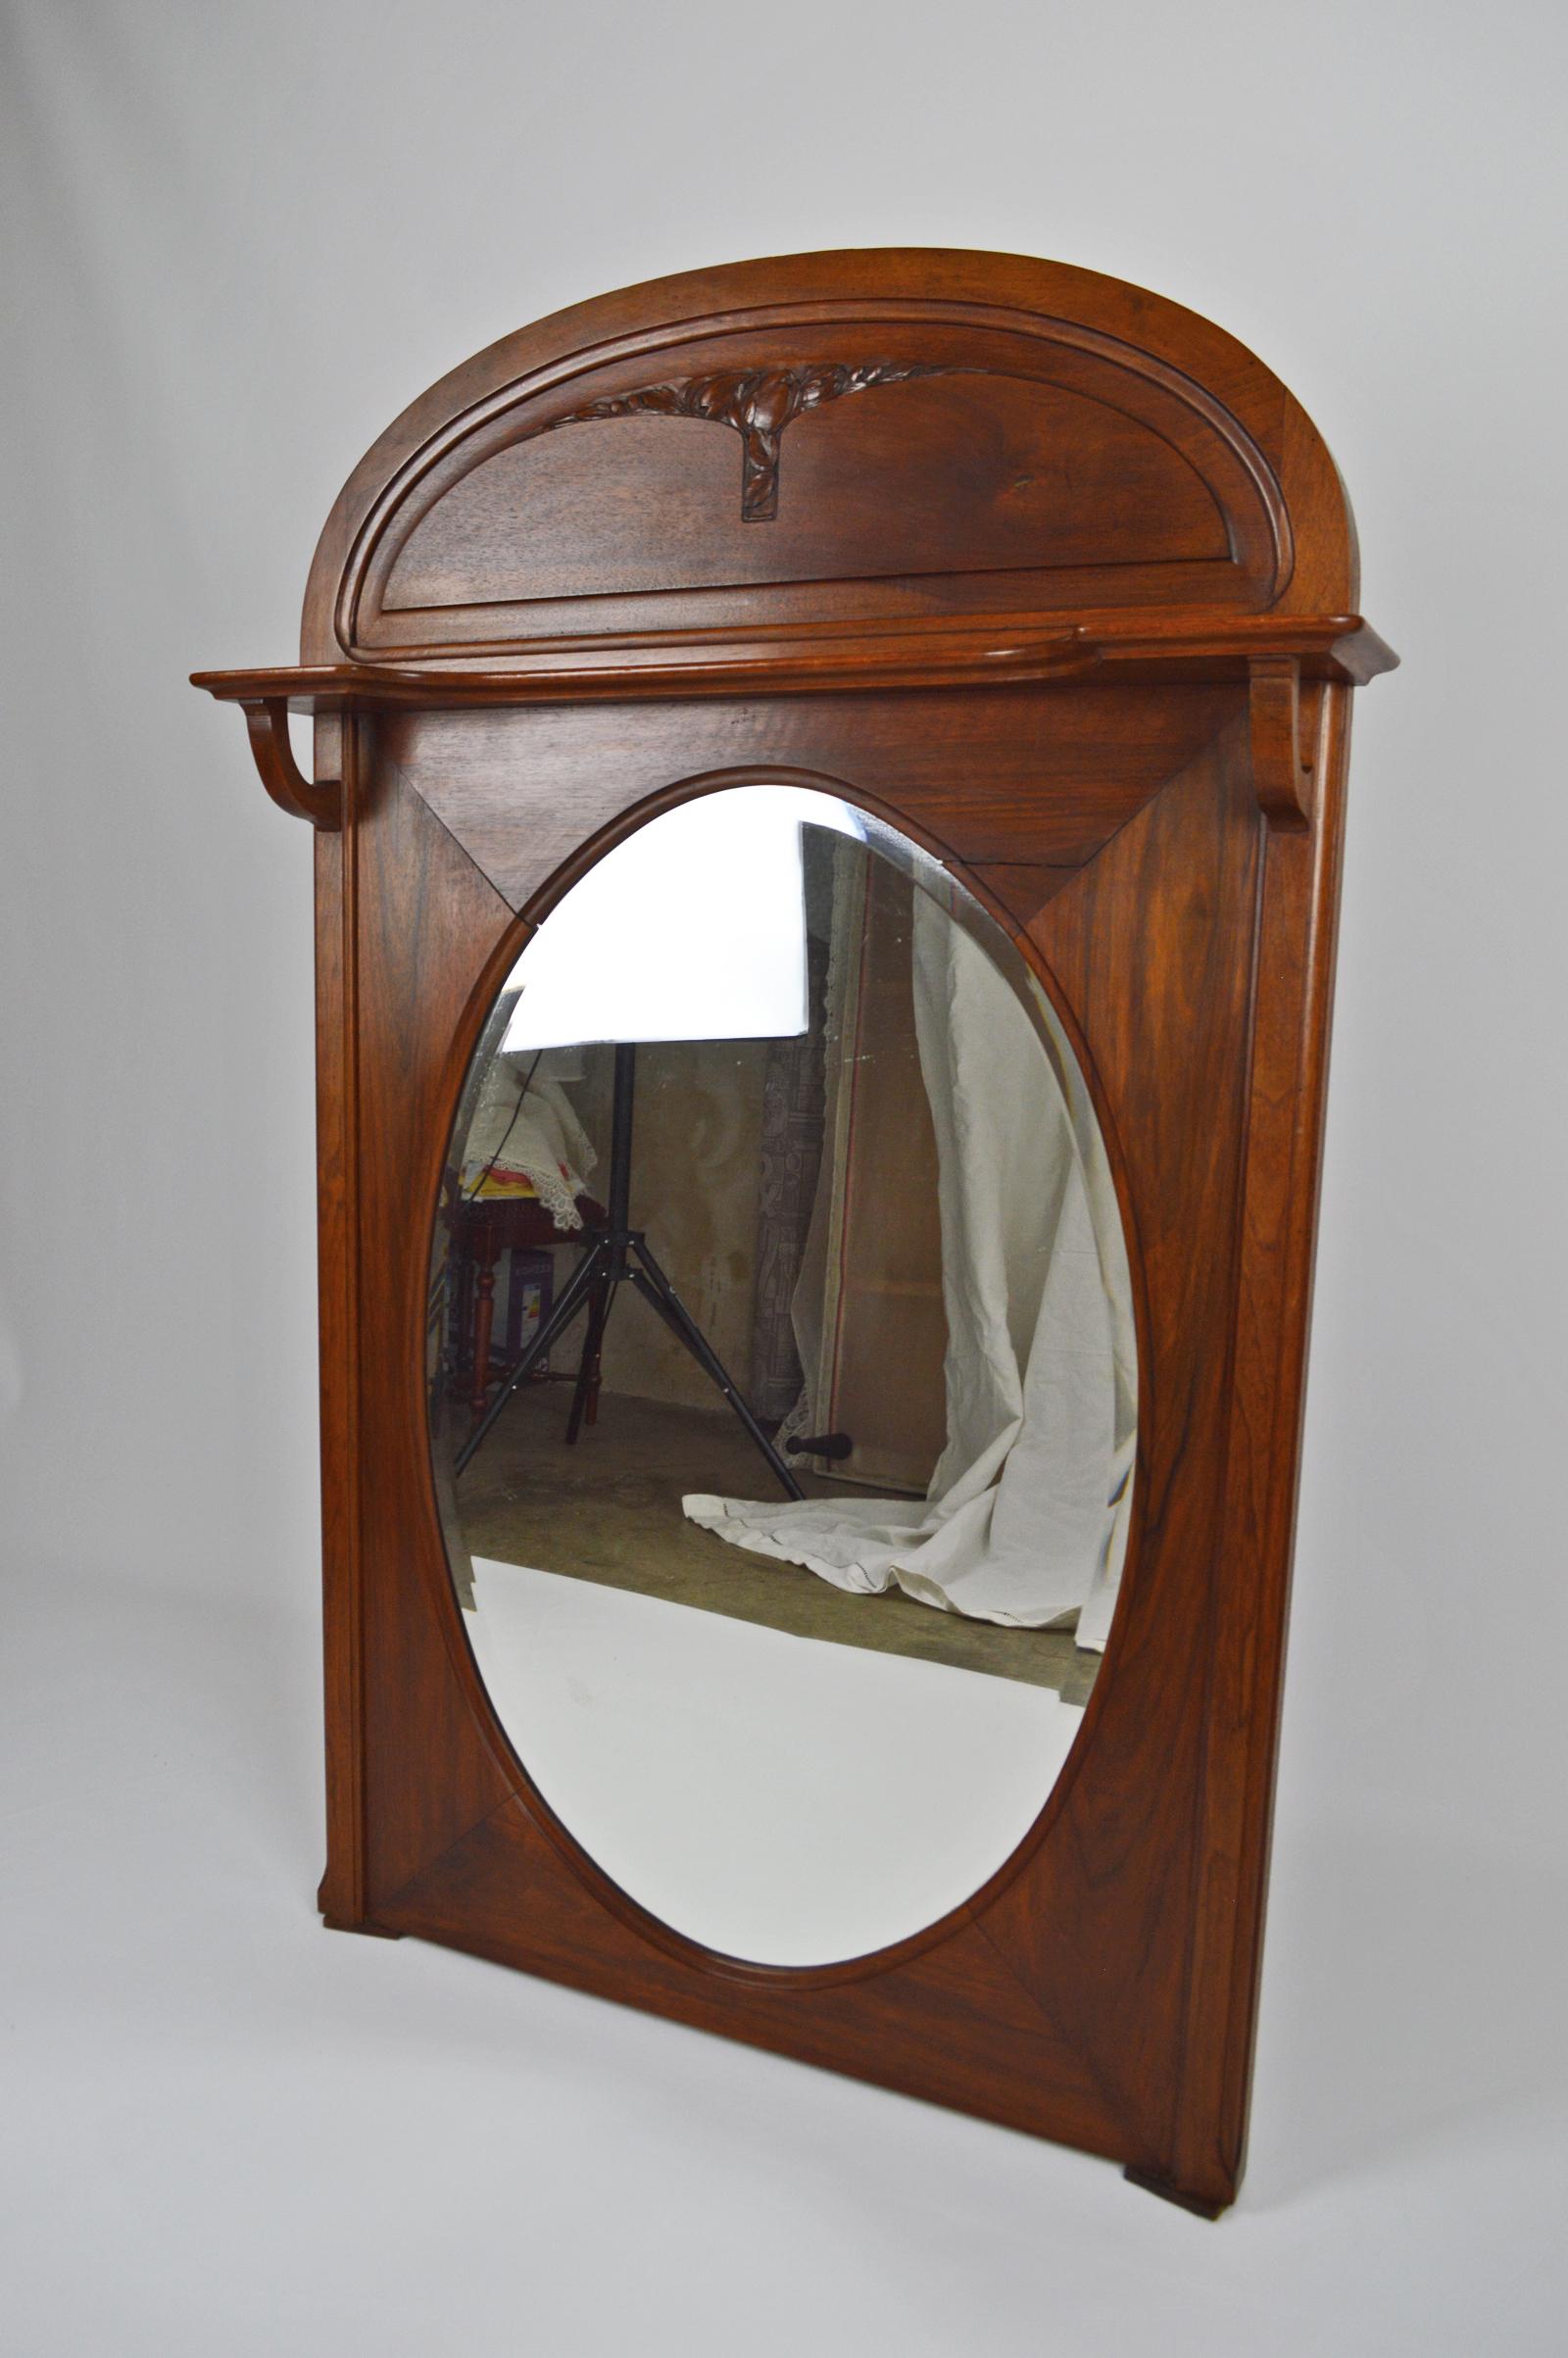 Beveled French Art Nouveau Fireplace Mantel Mirror, Carved Walnut on a Fruit Theme, 1910 For Sale